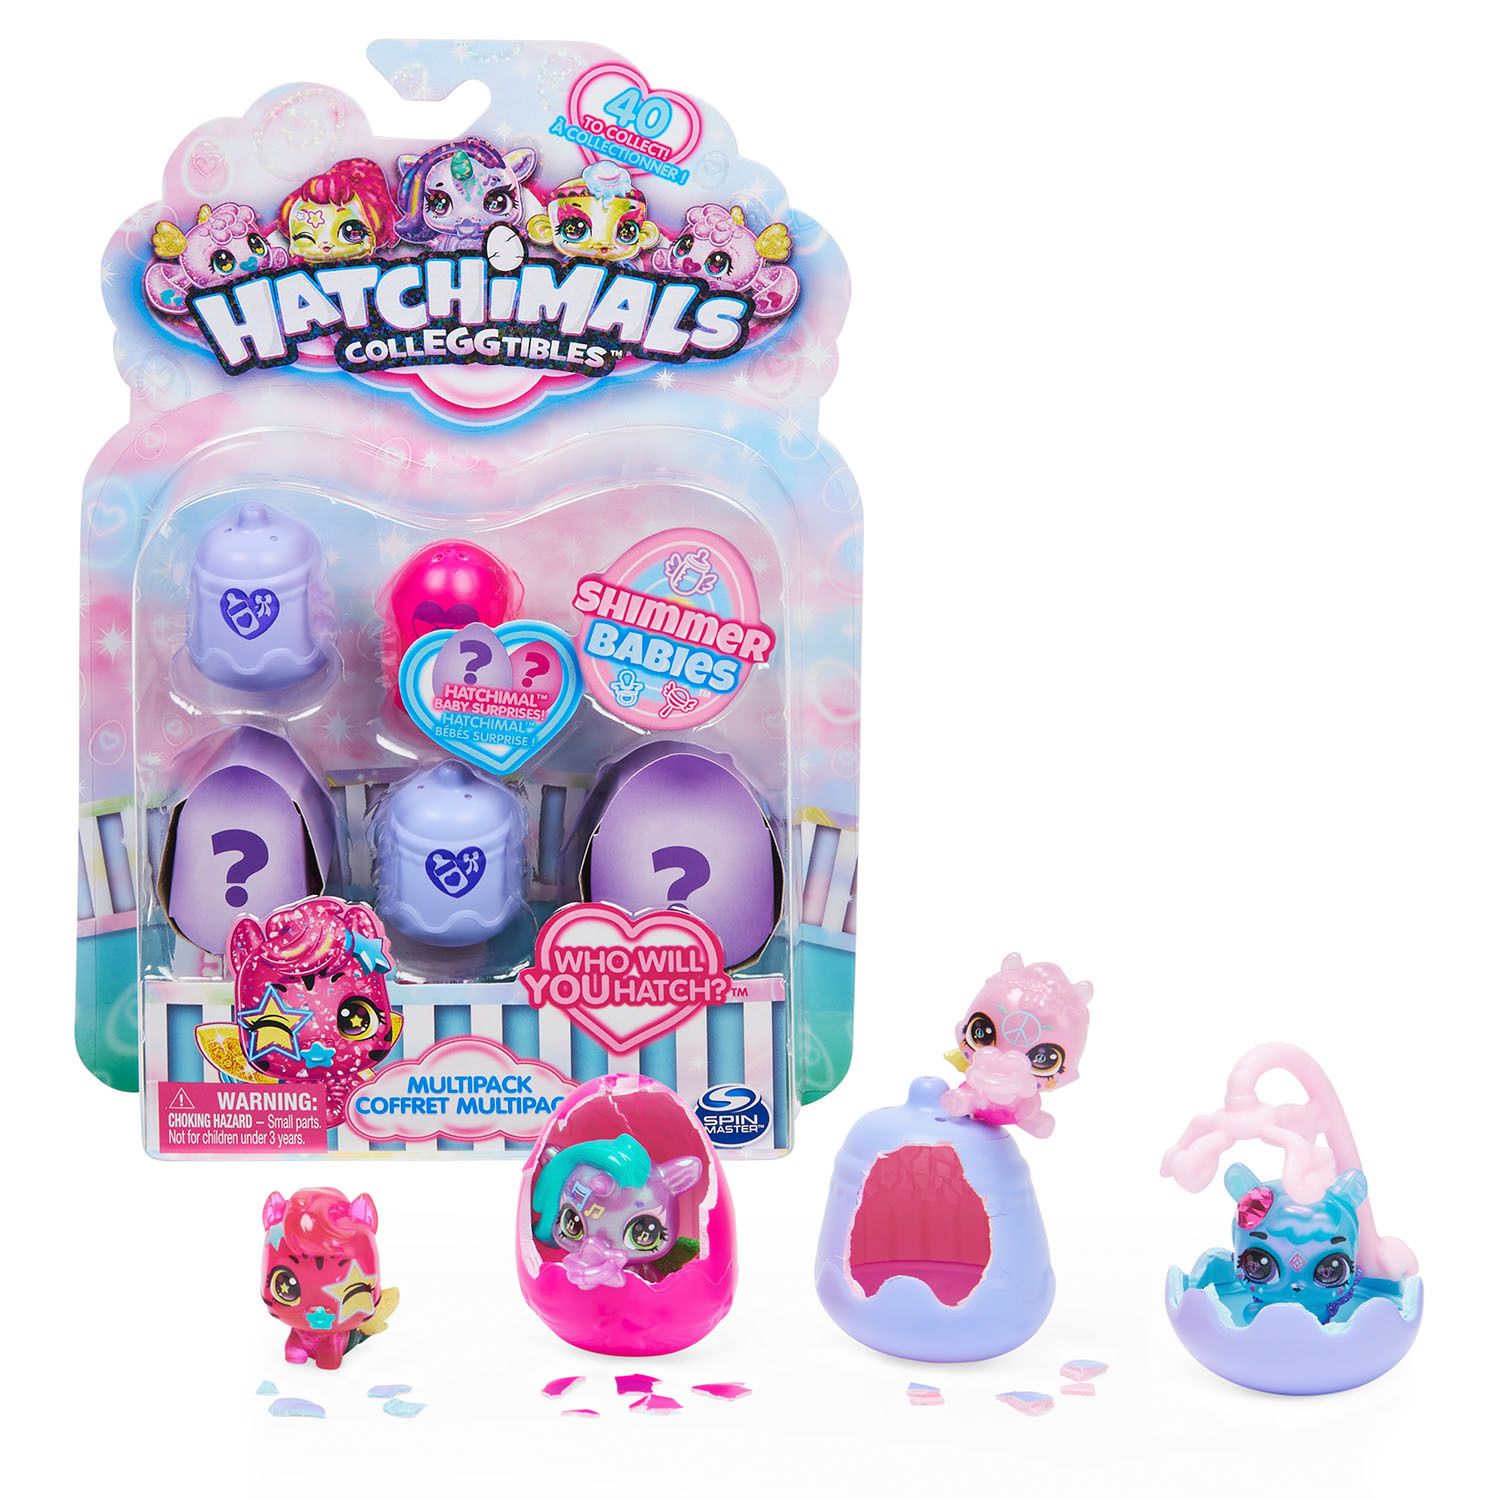 Image for Hatchimals CollEGGtibles Shimmer Babies Multipack with 4 Characters and Surprise Accessory at Kohl's.